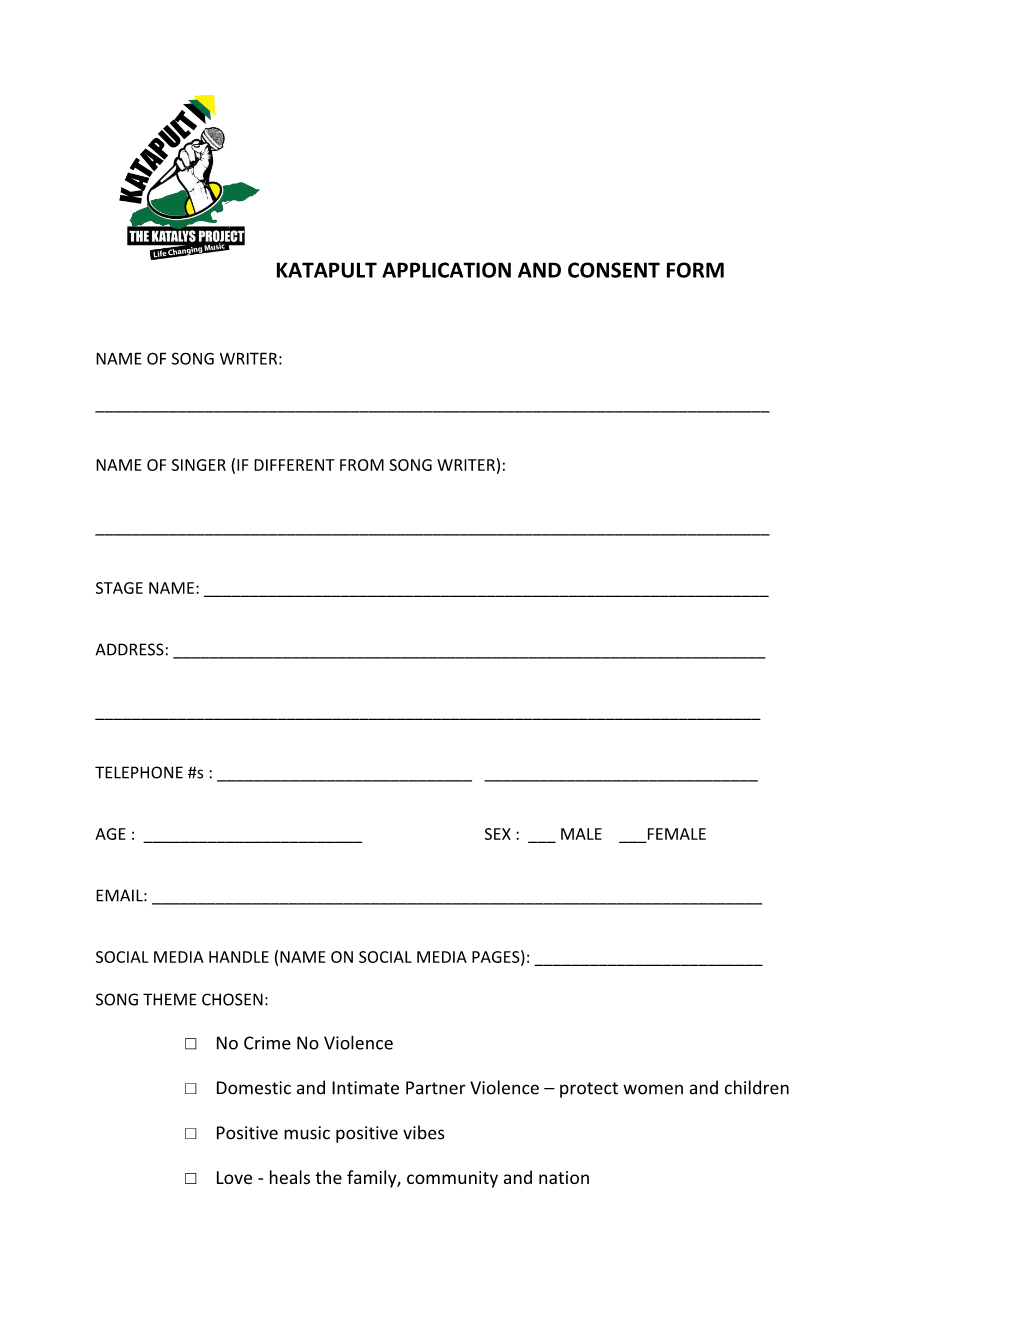 Katapult Application and Consent Form